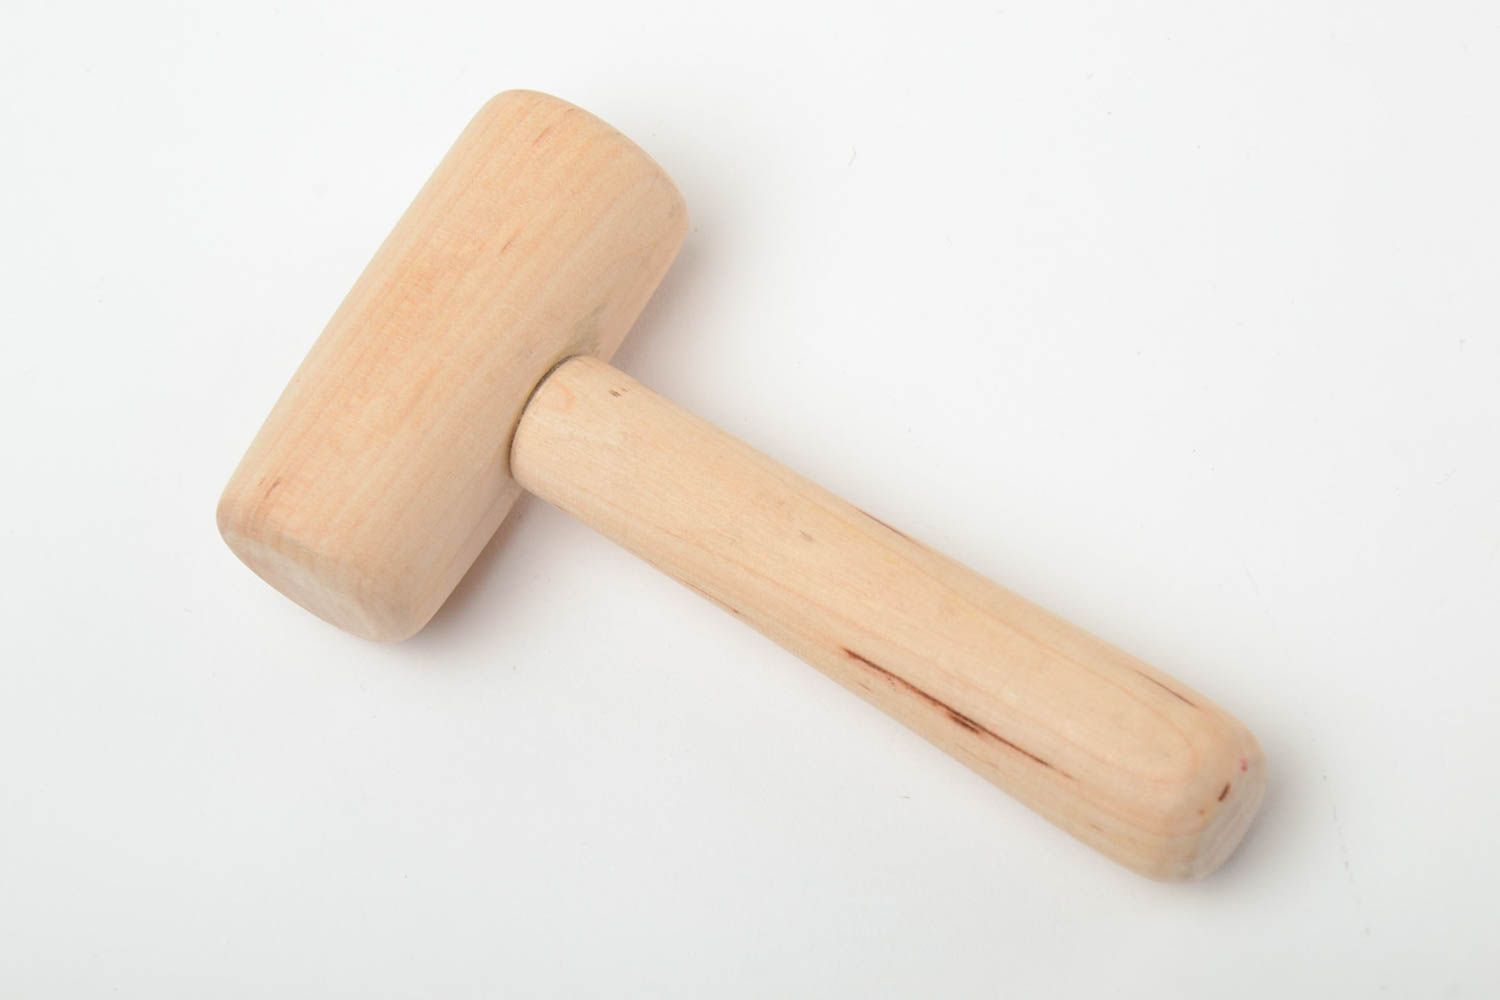 Handmade decorative eco friendly wooden hammer toy for children and interior photo 3